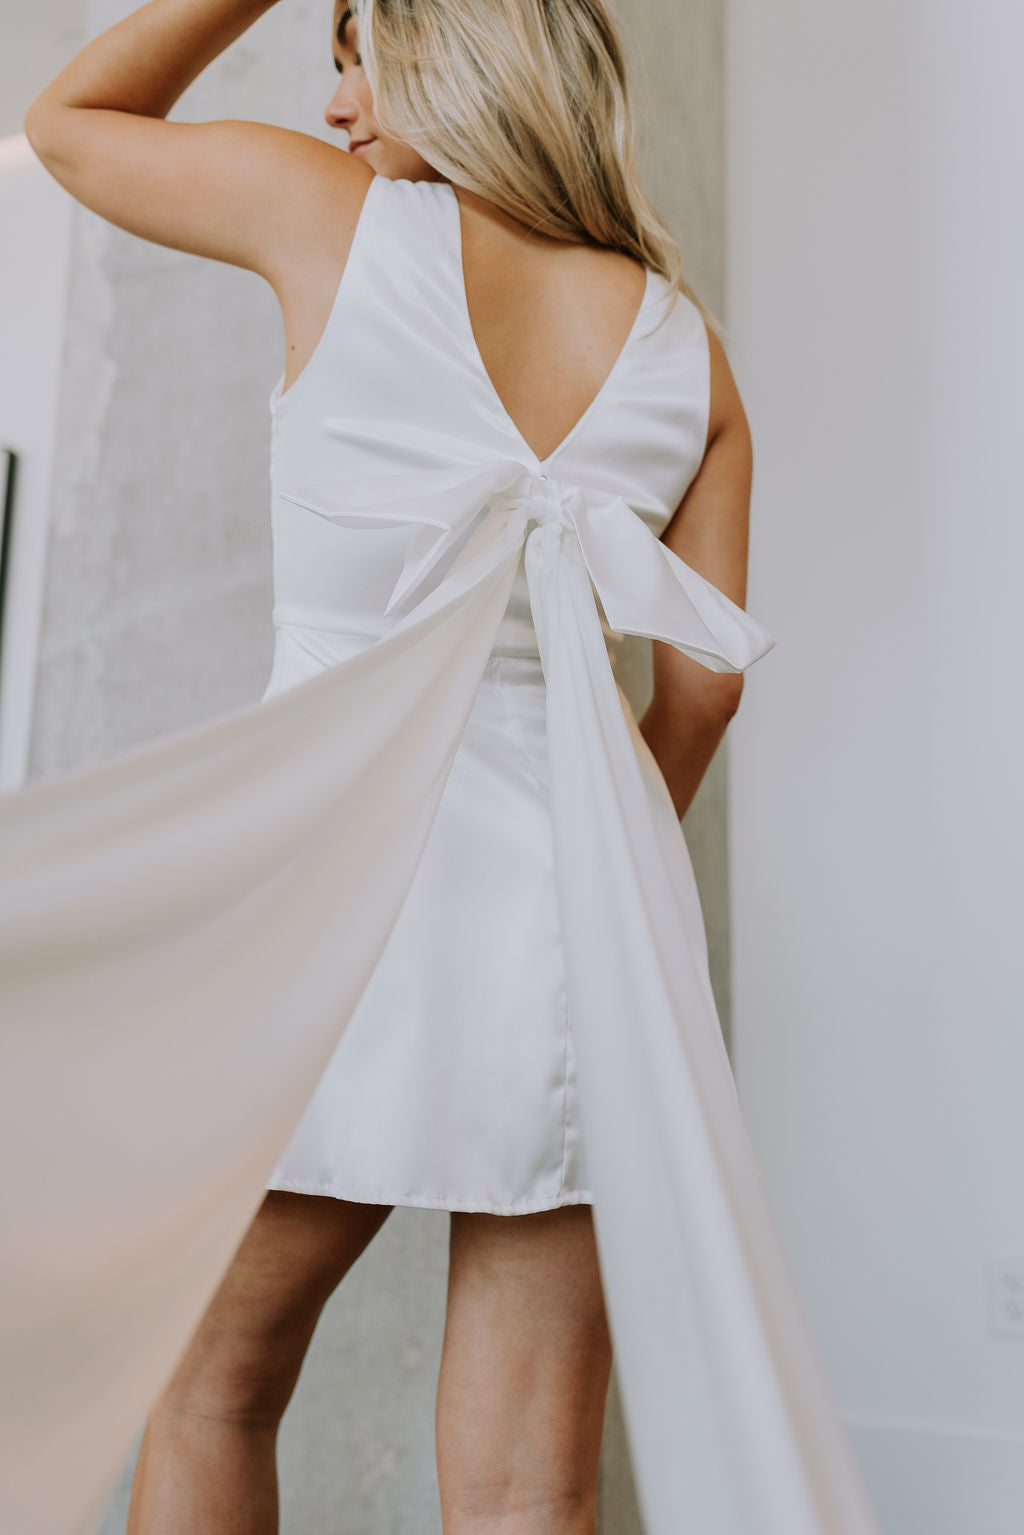 Back view of female model wearing the Melissa White Satin Bow Mini Dress which features White Satin Fabric, White Lining, Mini Length, Round Neckline, Sleeveless, Side Monochrome Zipper with Hook Closure and Bow Detail